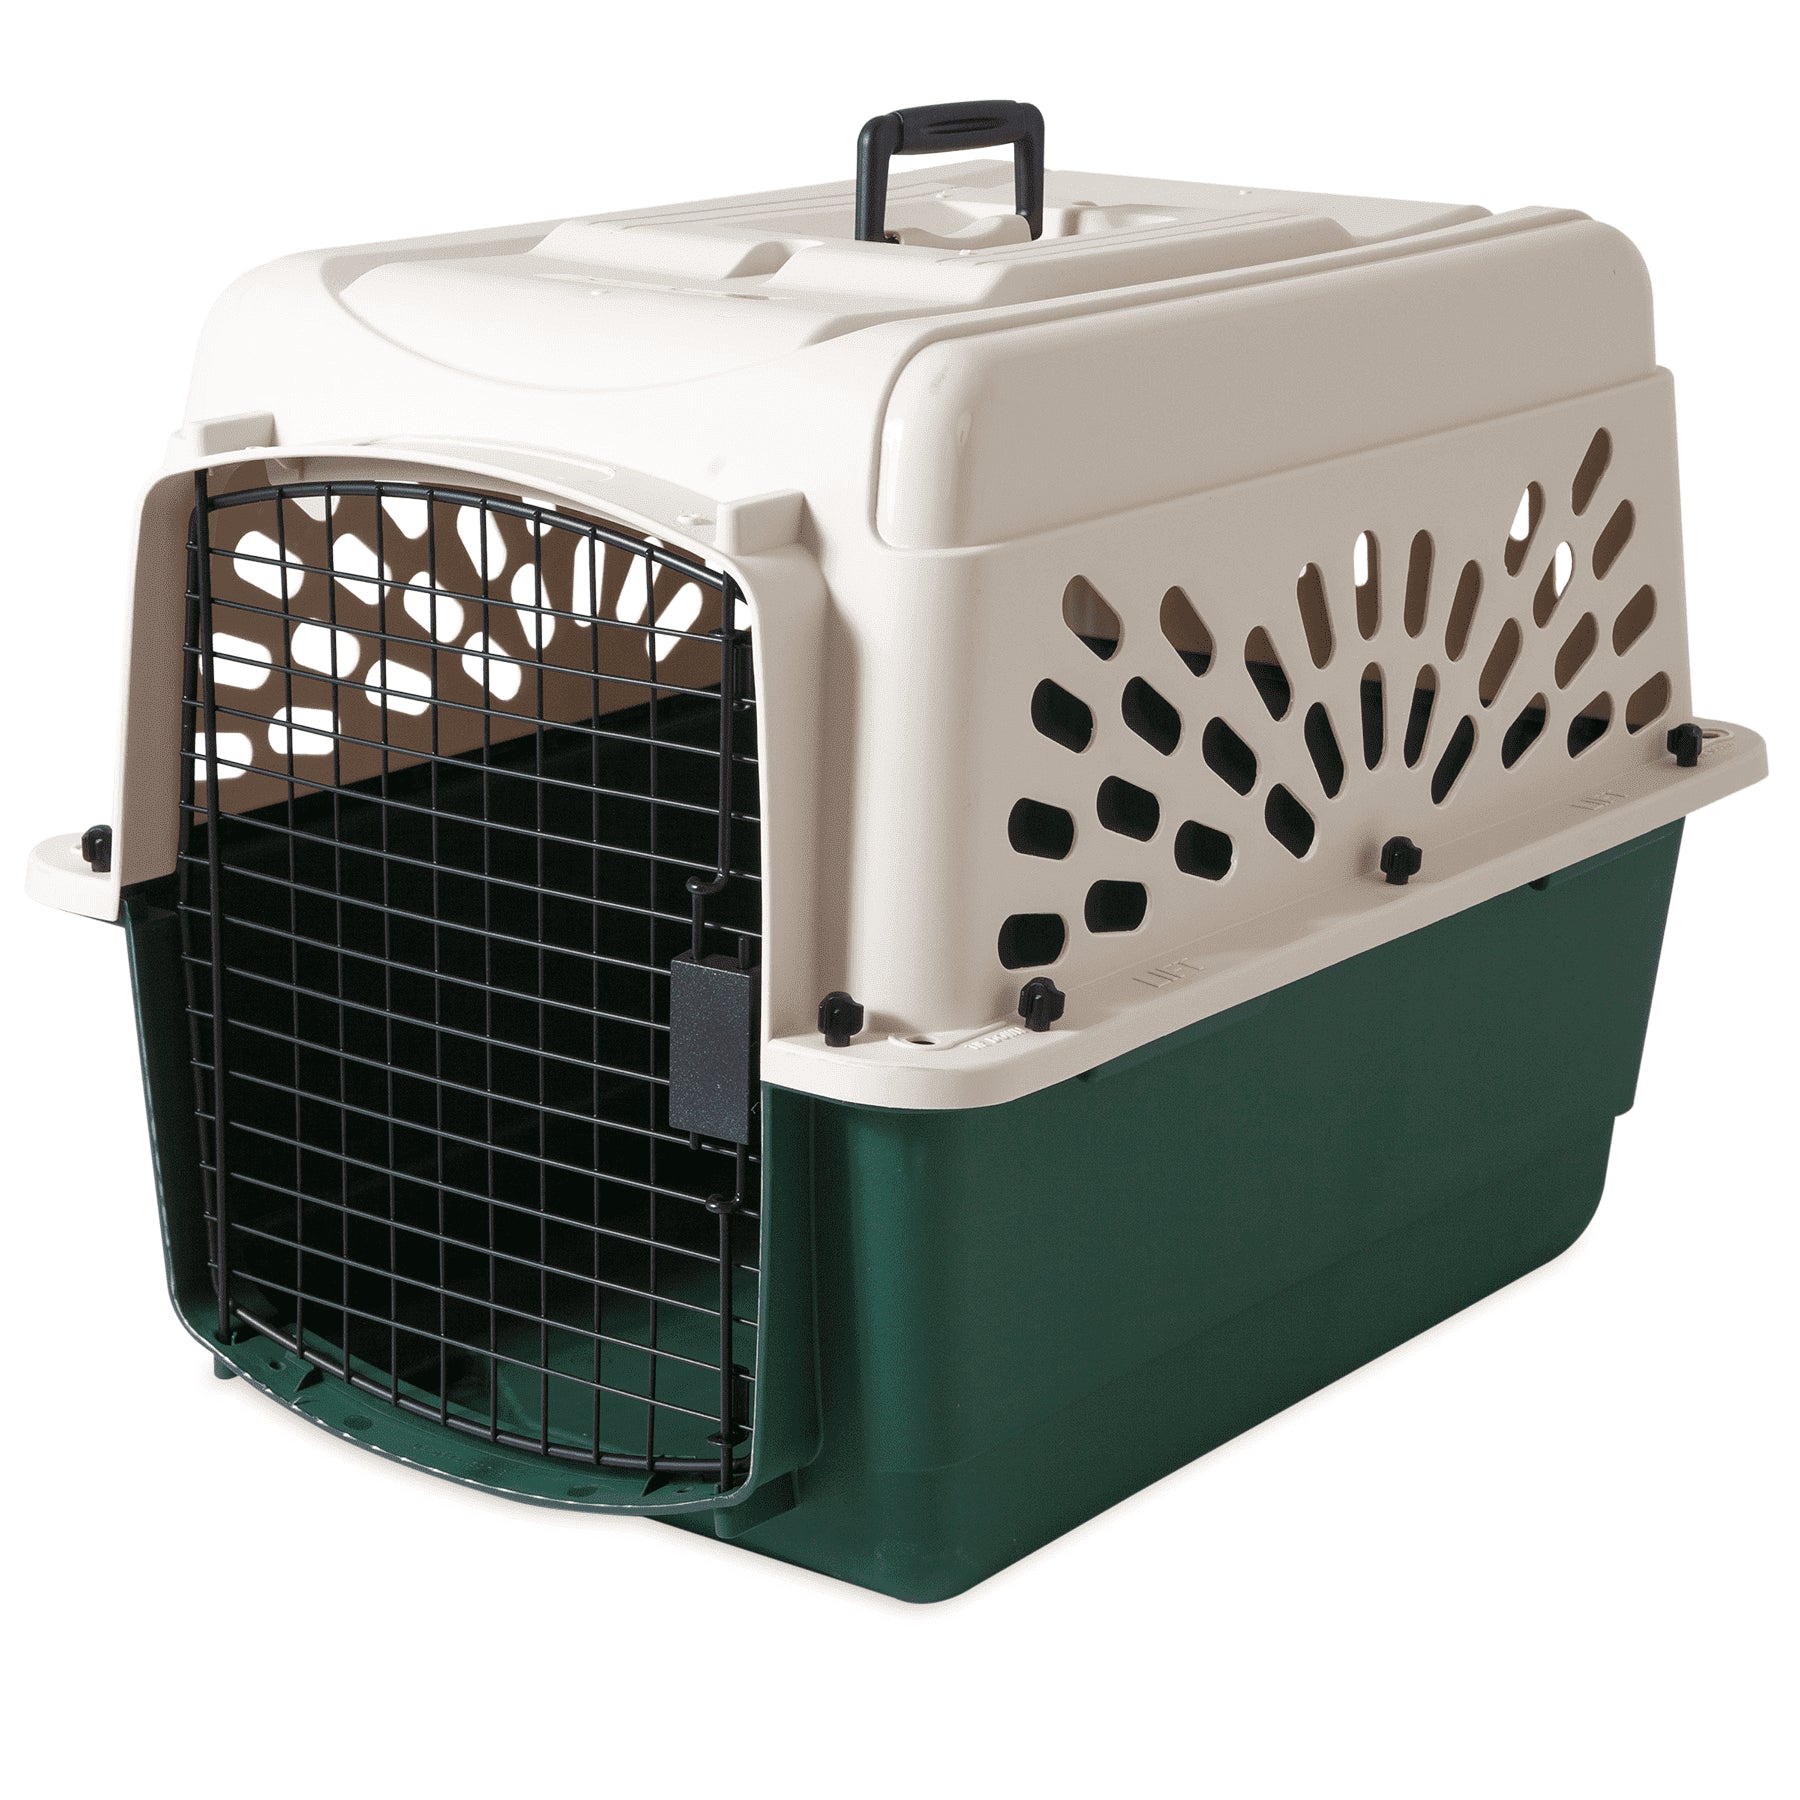 Ruffmaxx 28" Portable Dog Kennel Plastic Pet Carrier for Dogs 20 to 30 lb, Tan/Green